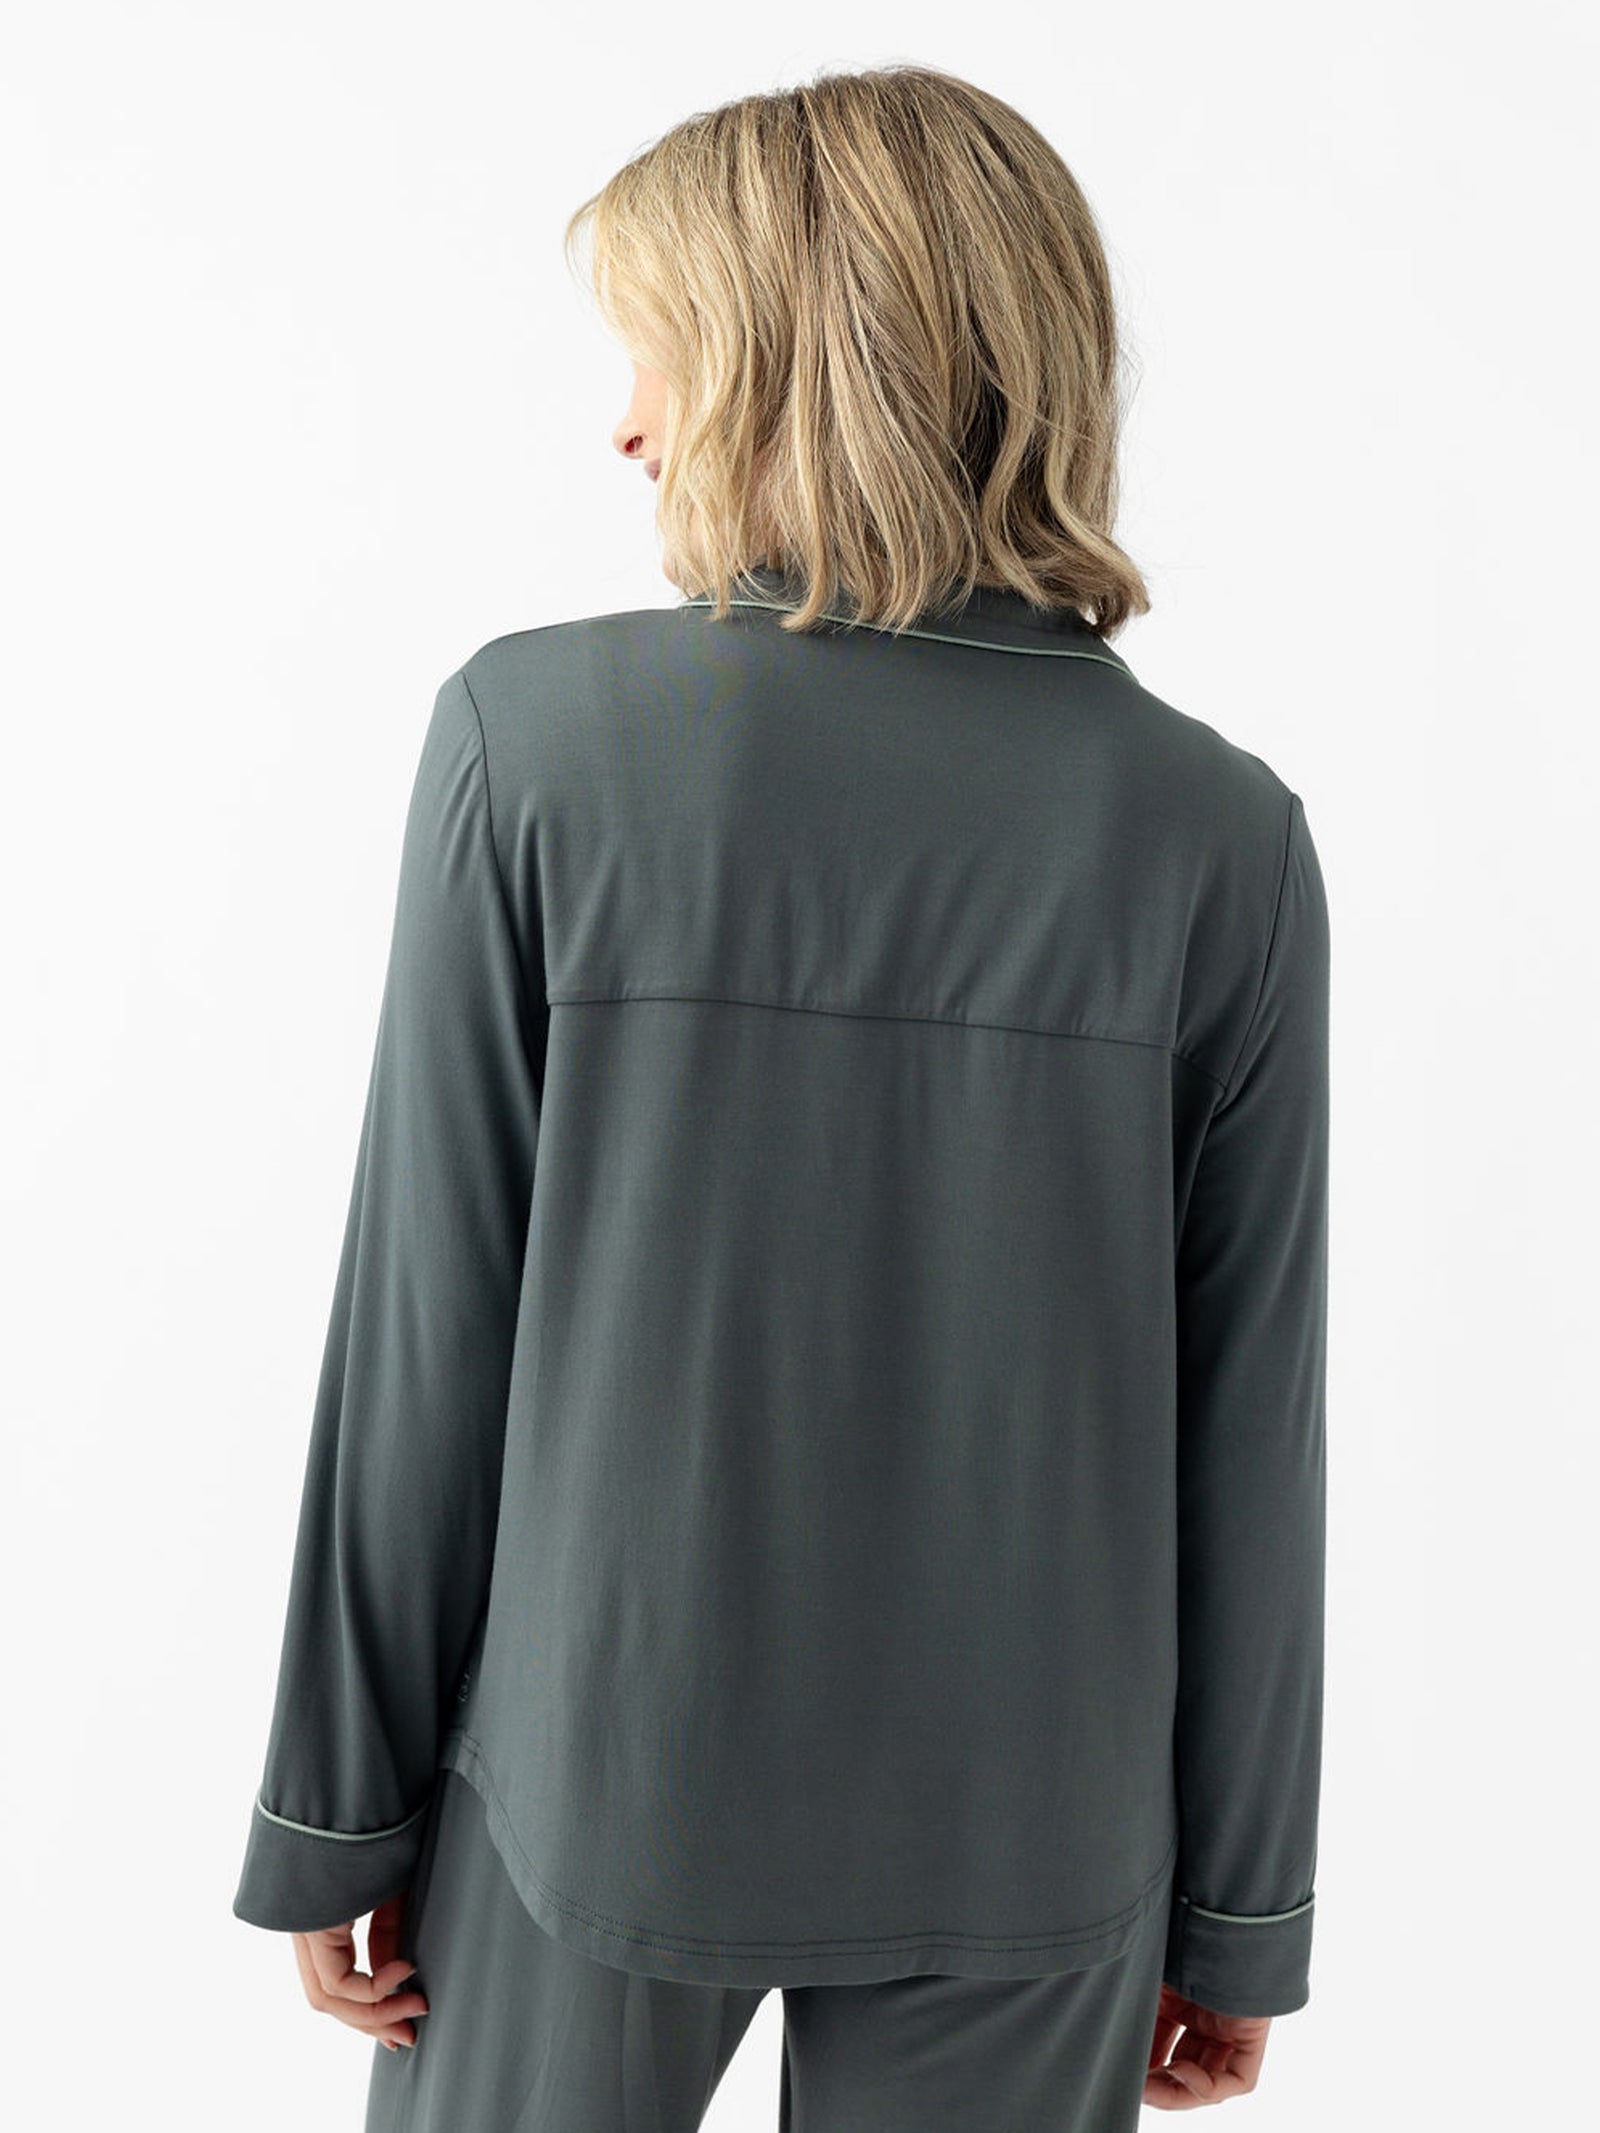 Back of woman wearing storm pajamas with white background 